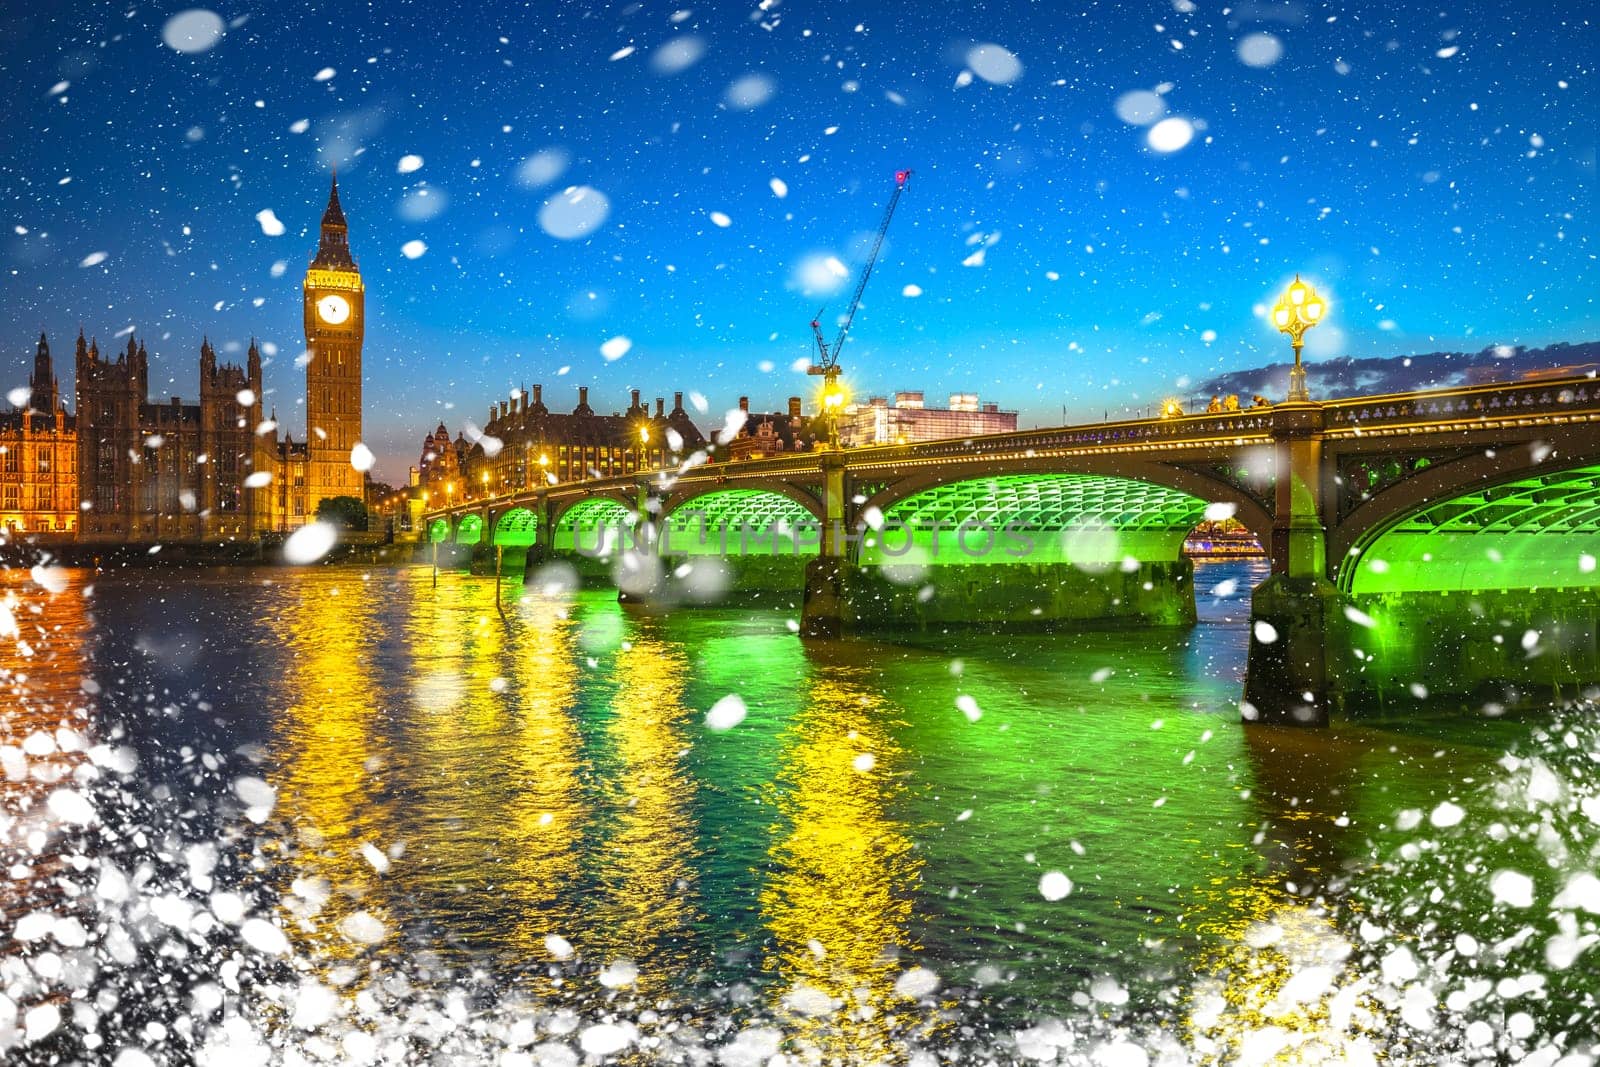 Big Ben clock tower in London sundown winter snow view from Thames river by xbrchx